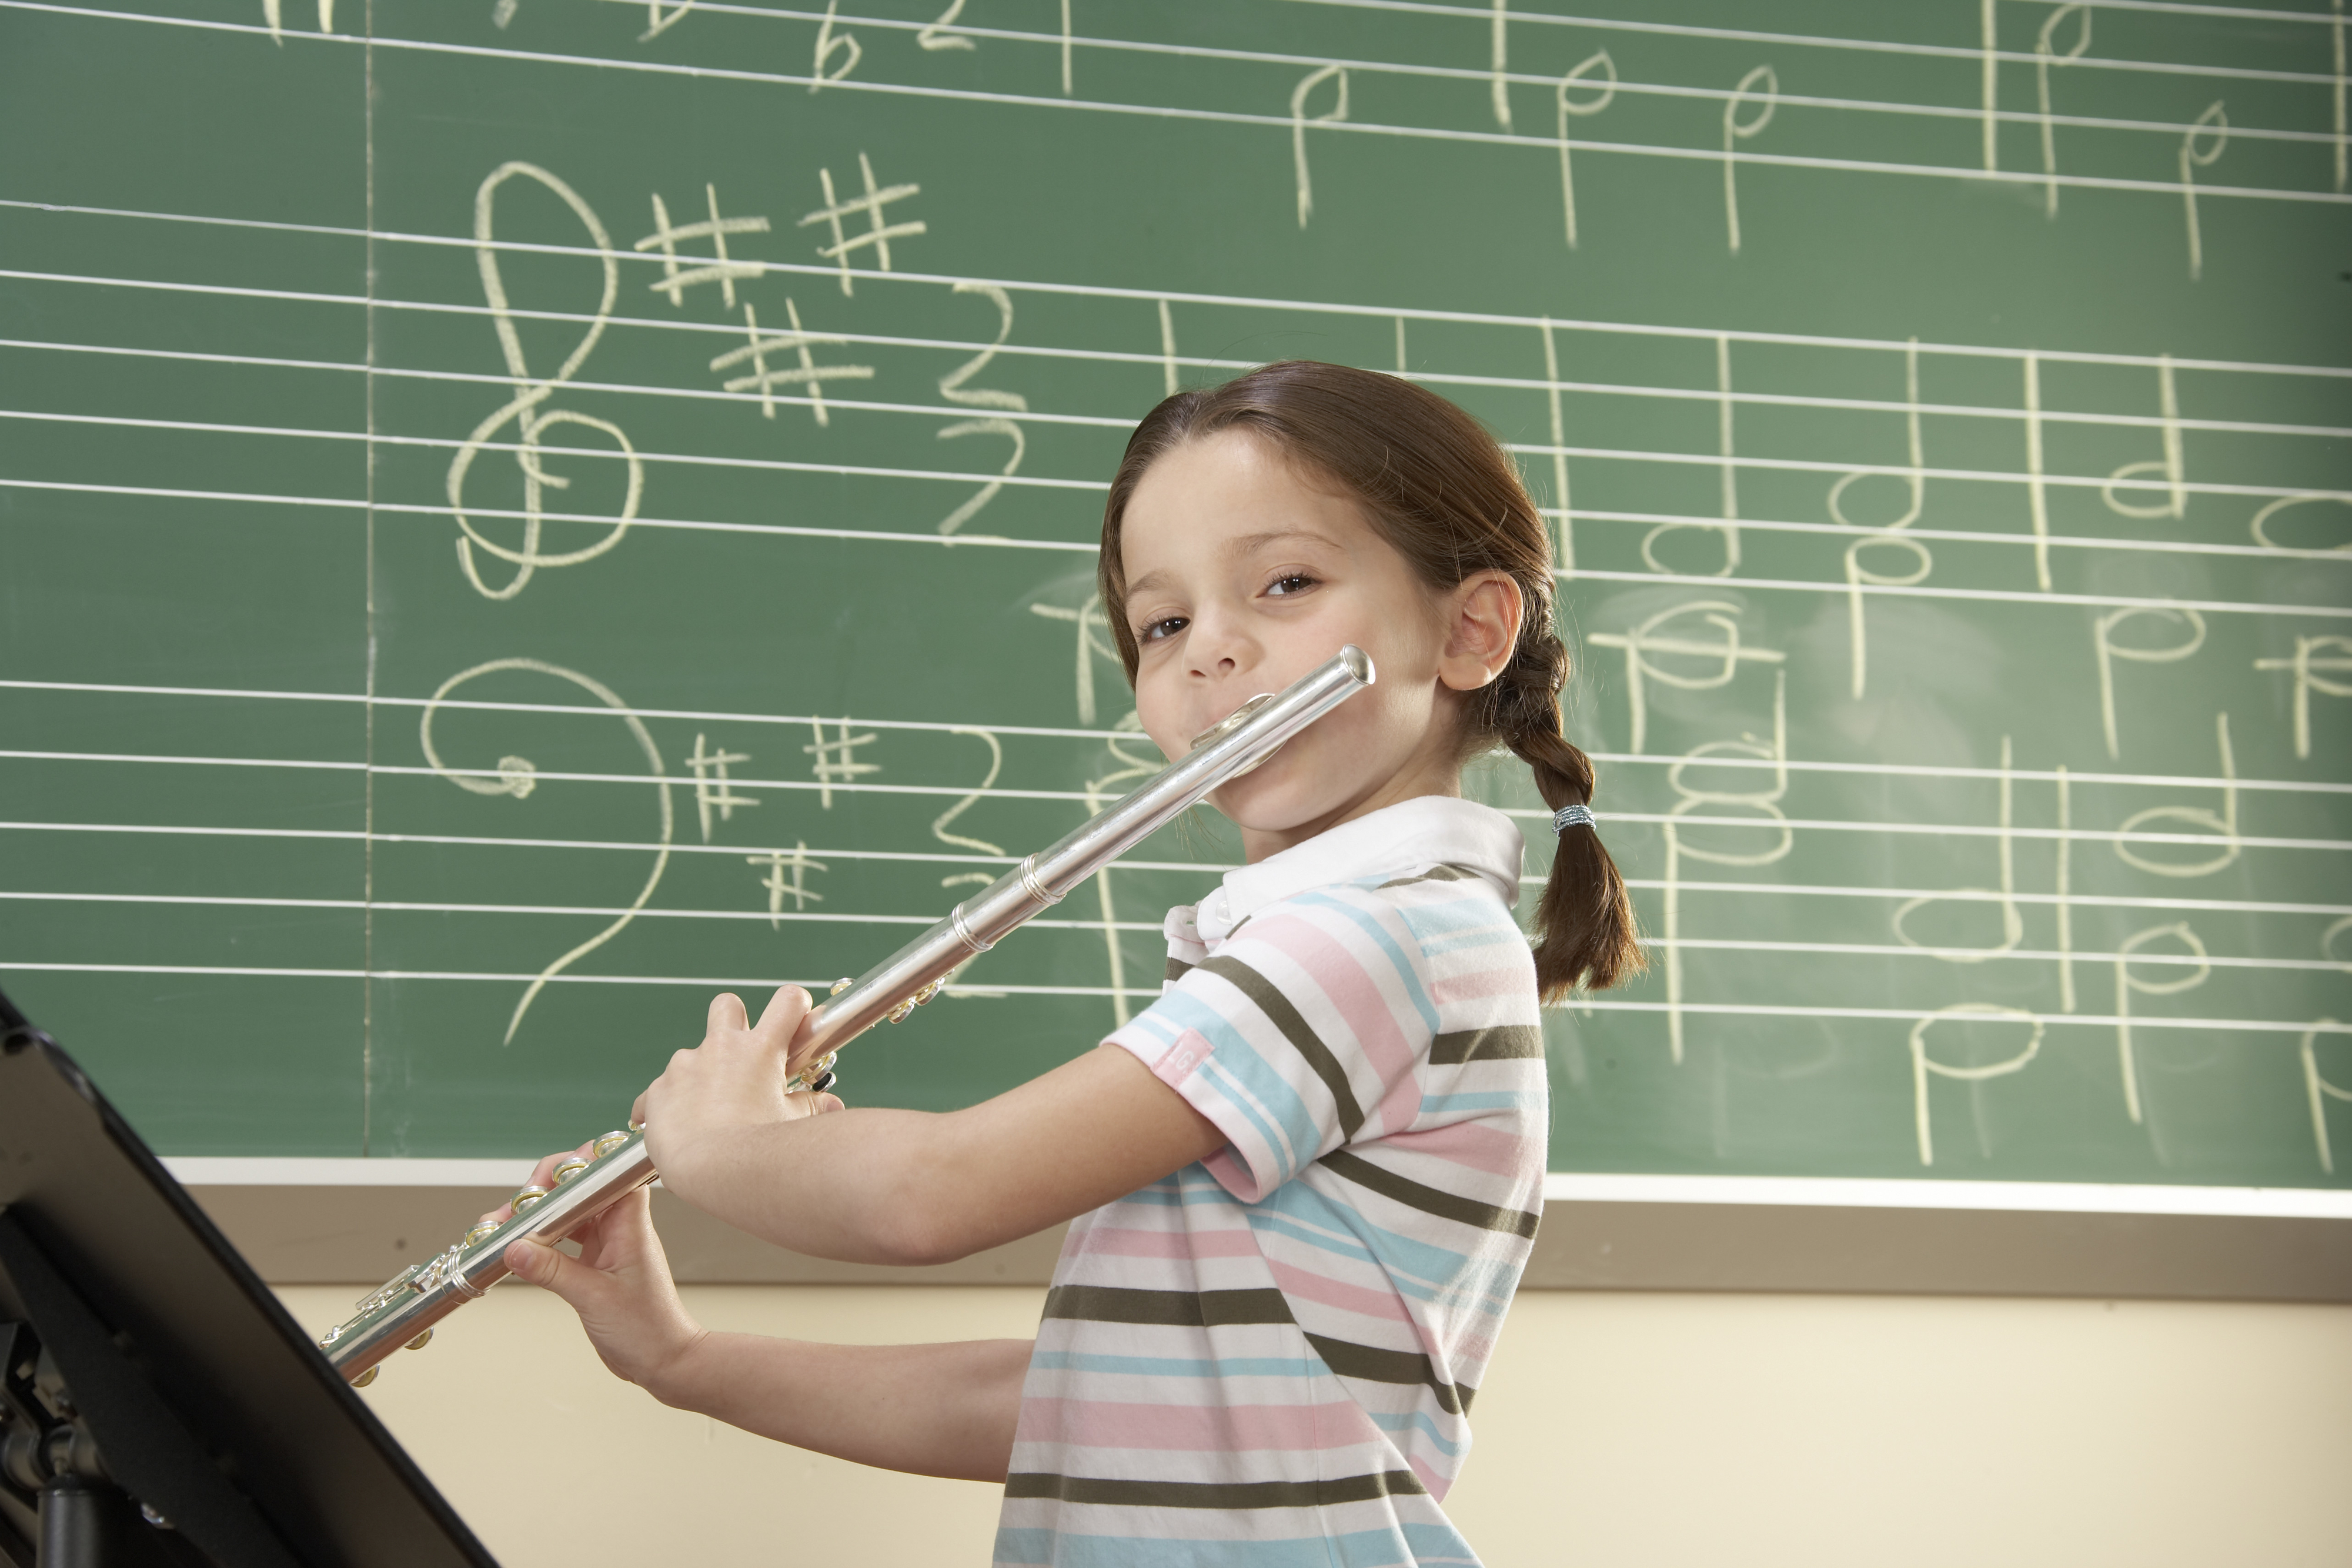 Young student playing flute in music class with chalkboard notation in background